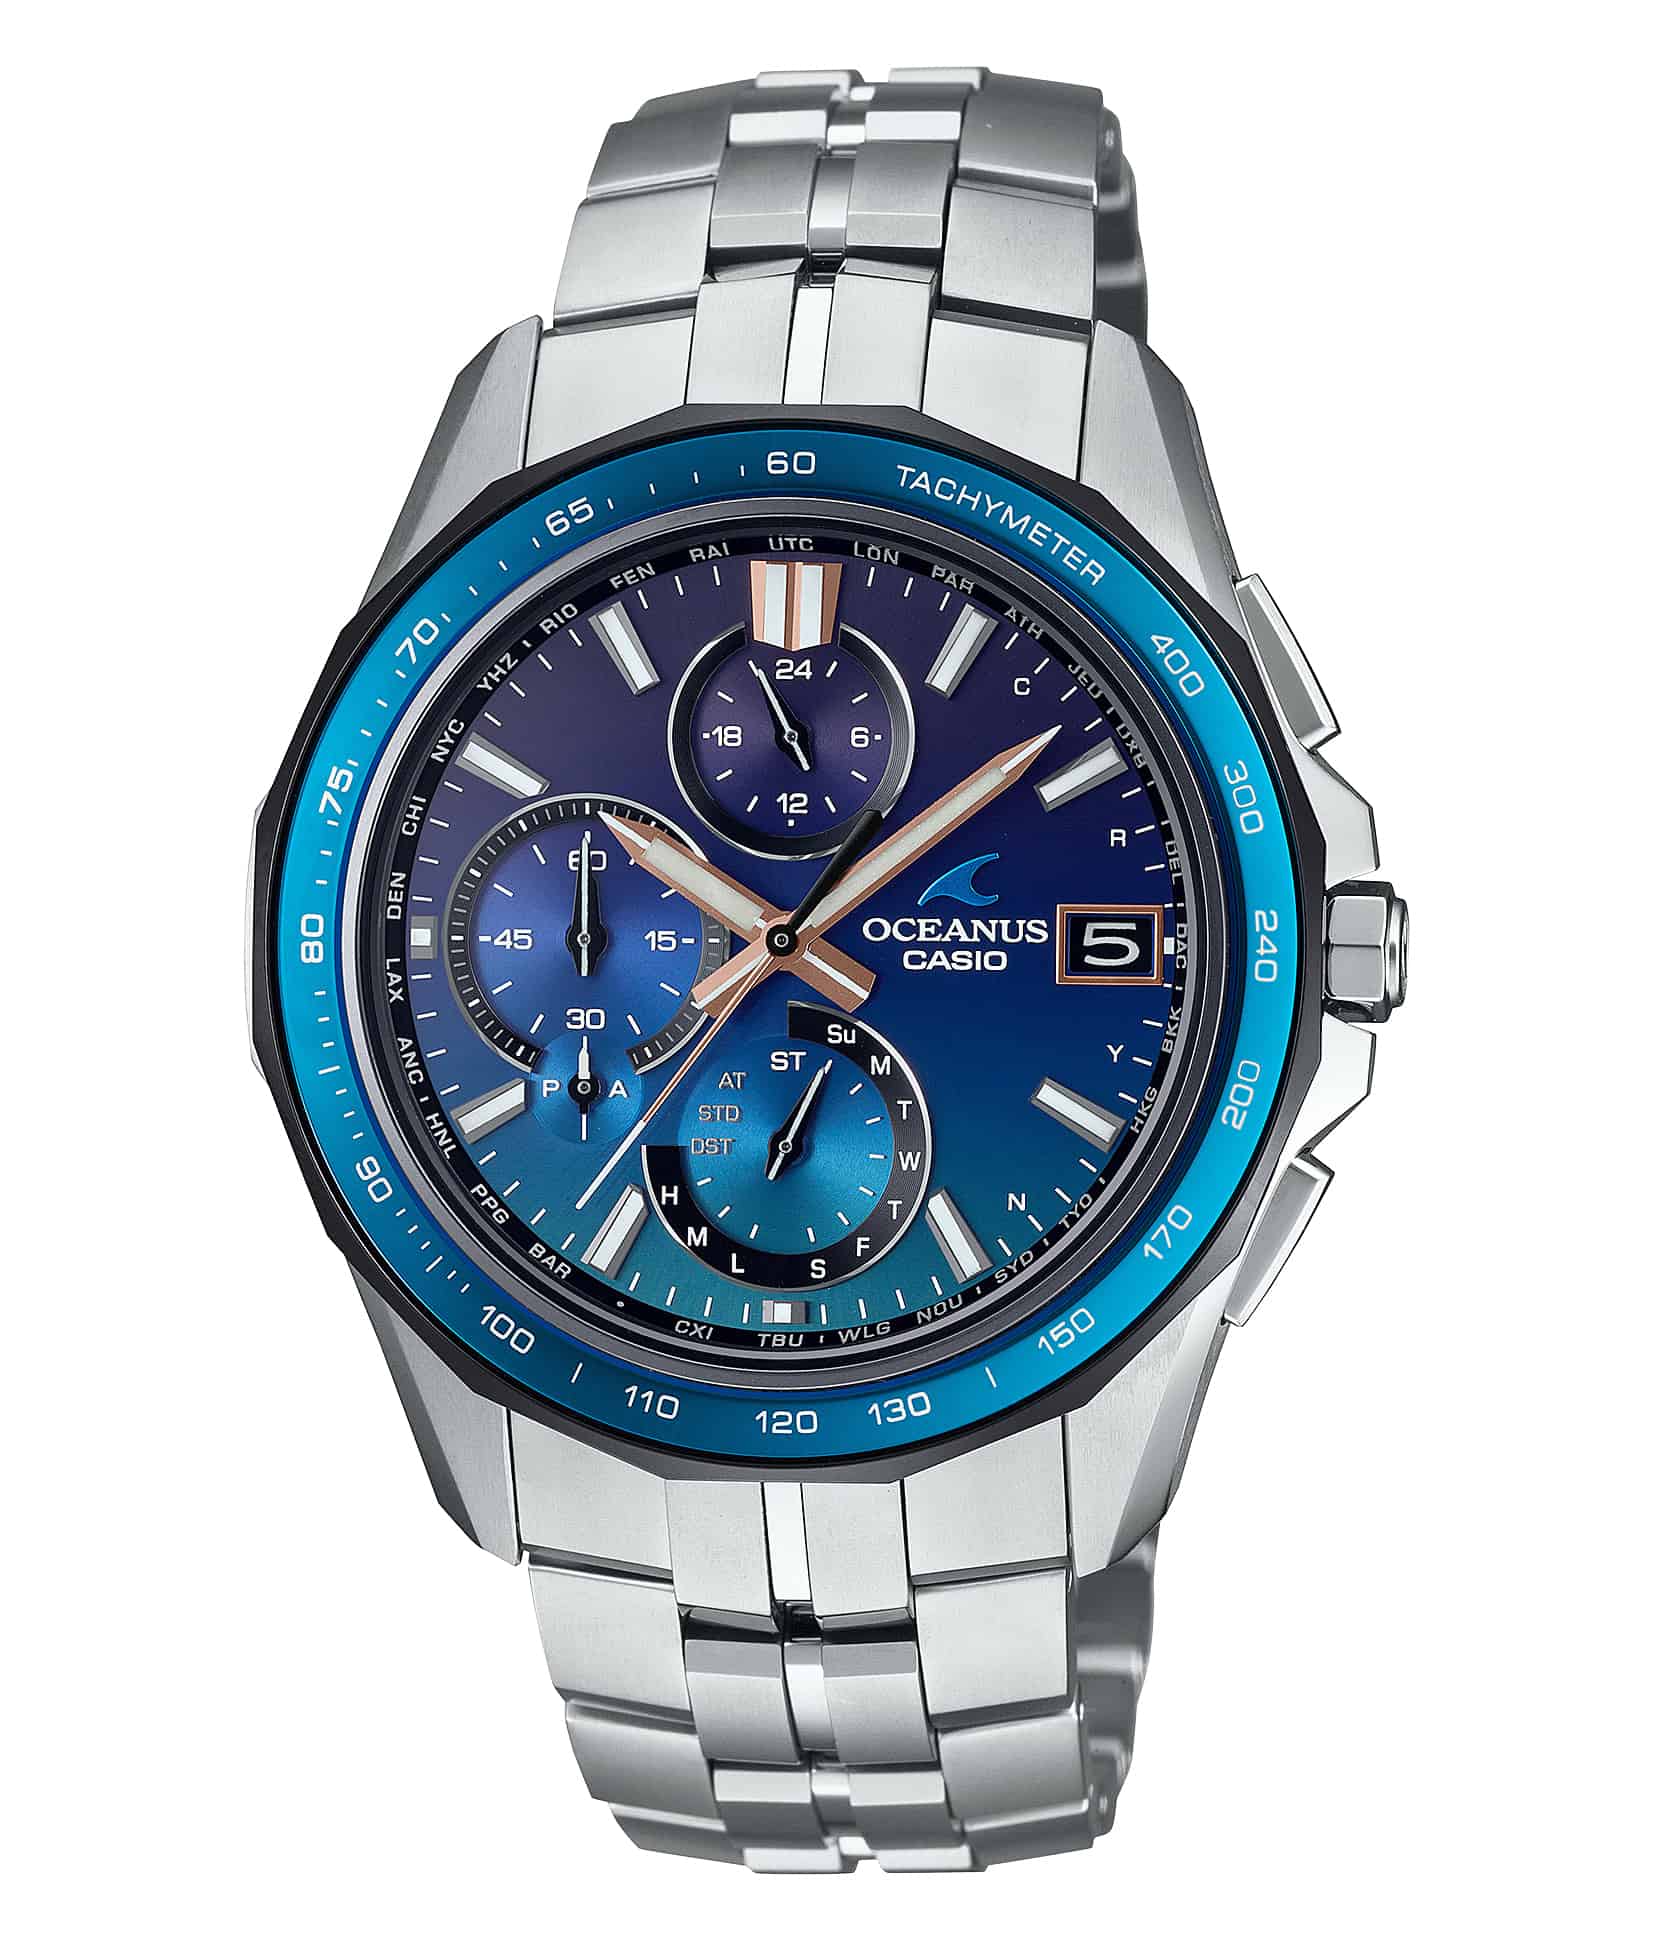 The New Casio Oceanus Pays Tribute to the Deep Blue Sea with Spiral-Cut ...